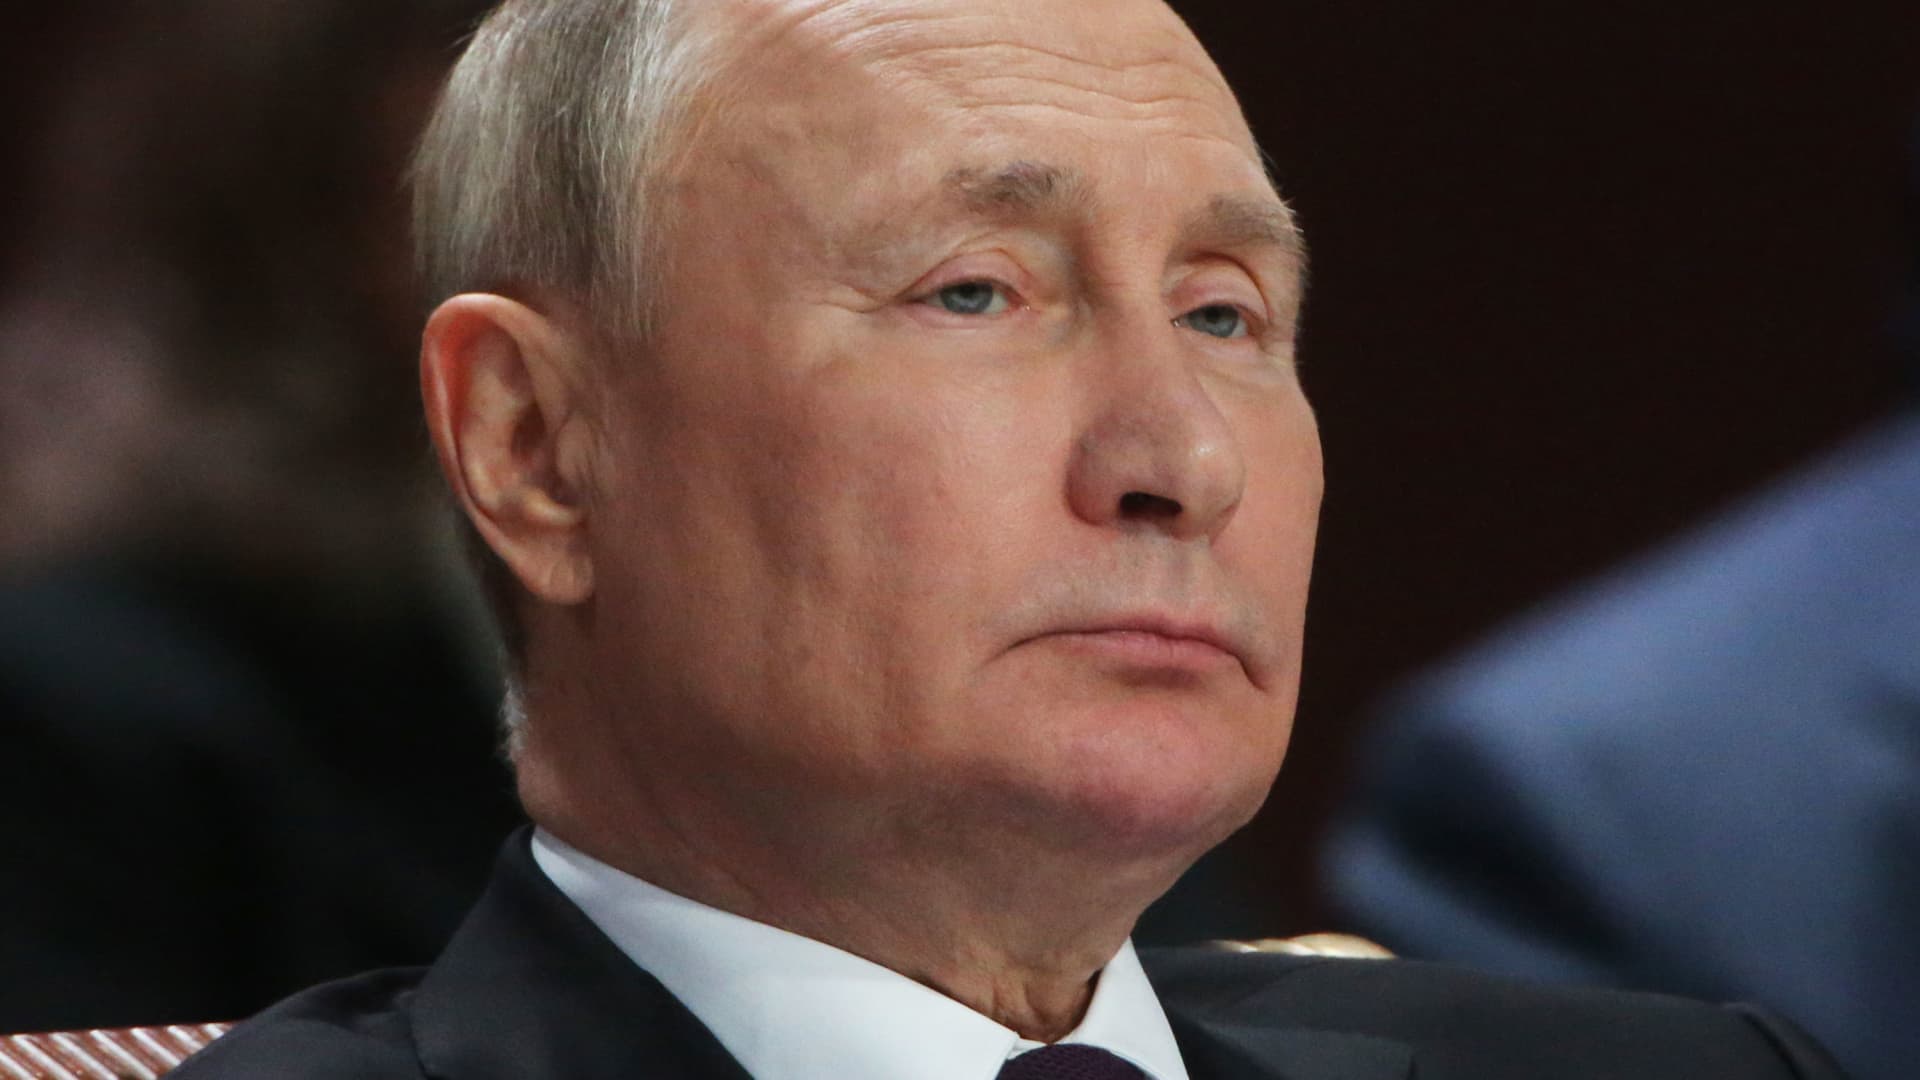 ‘Losing is not an option’: Putin is ‘desperate’ to avoid defeat in Ukraine as anxiety rises in Moscow